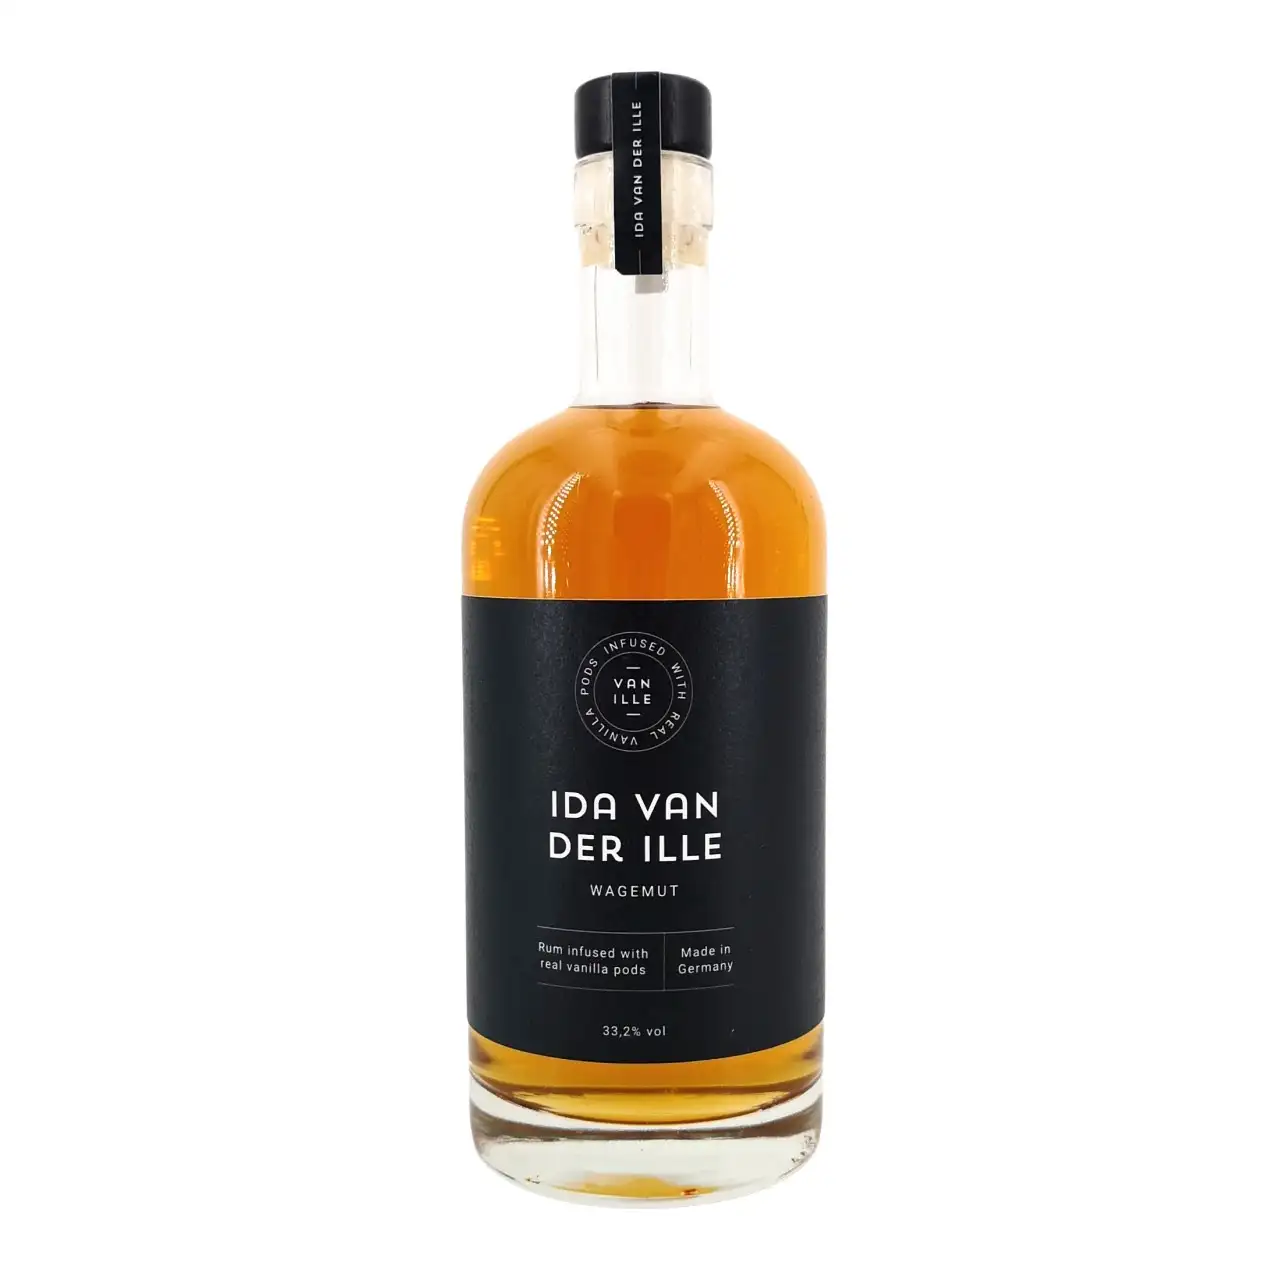 Image of the front of the bottle of the rum Wagemut Ida van der Ille